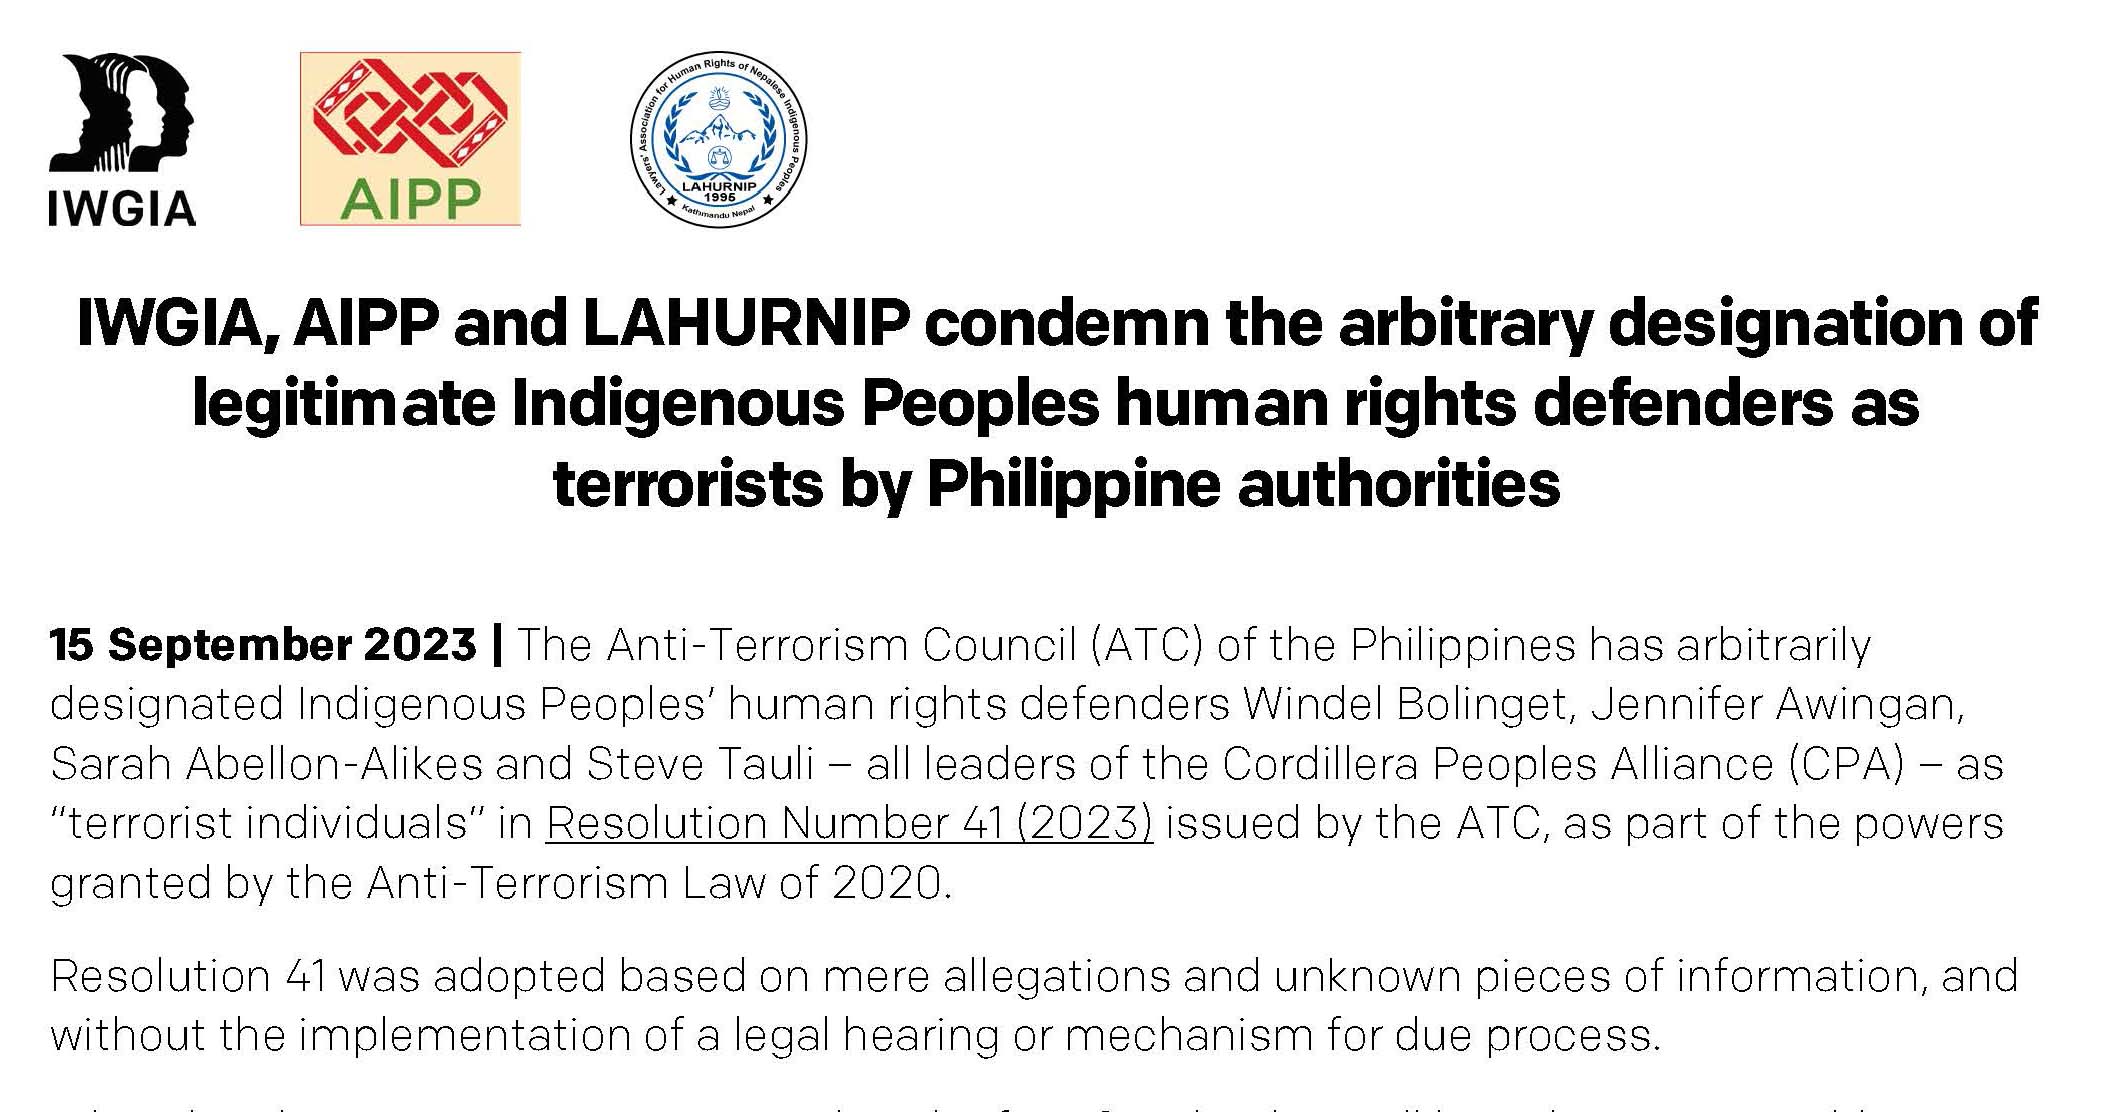 IWGIA, AIPP and LAHURNIP condemn the arbitrary designation of legitimate Indigenous Peoples human rights defenders as terrorists by Philippine authorities